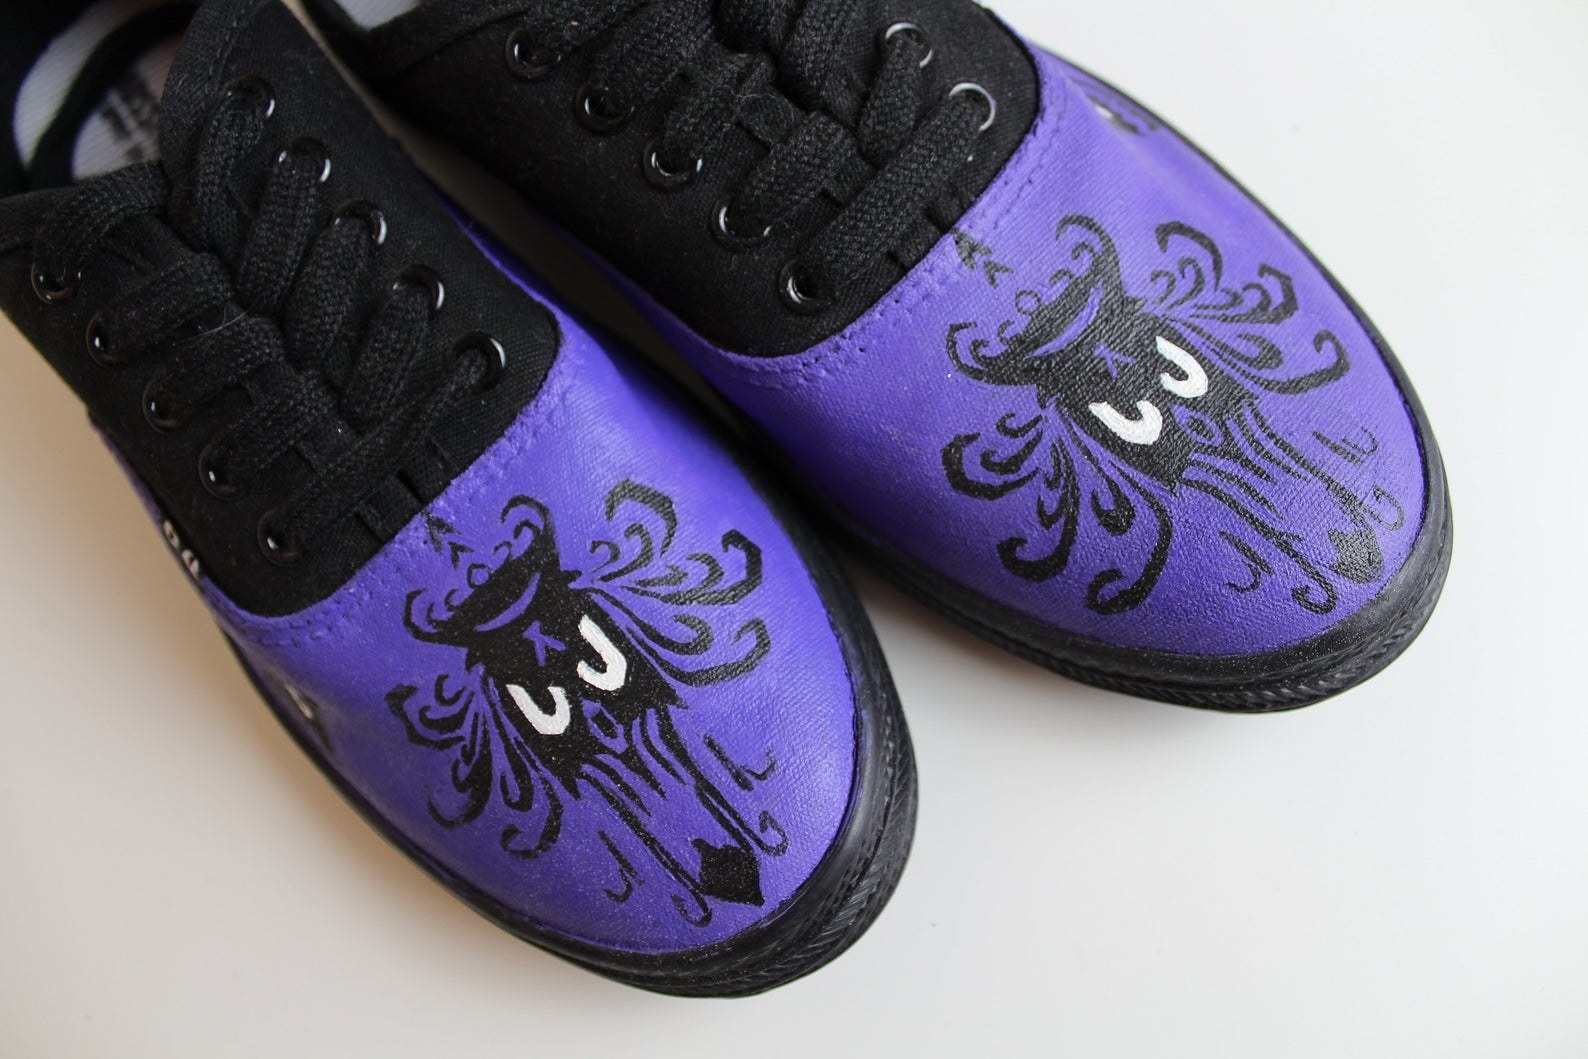 sneakers with the pattern of the Haunted Mansion wallpaper painted on them